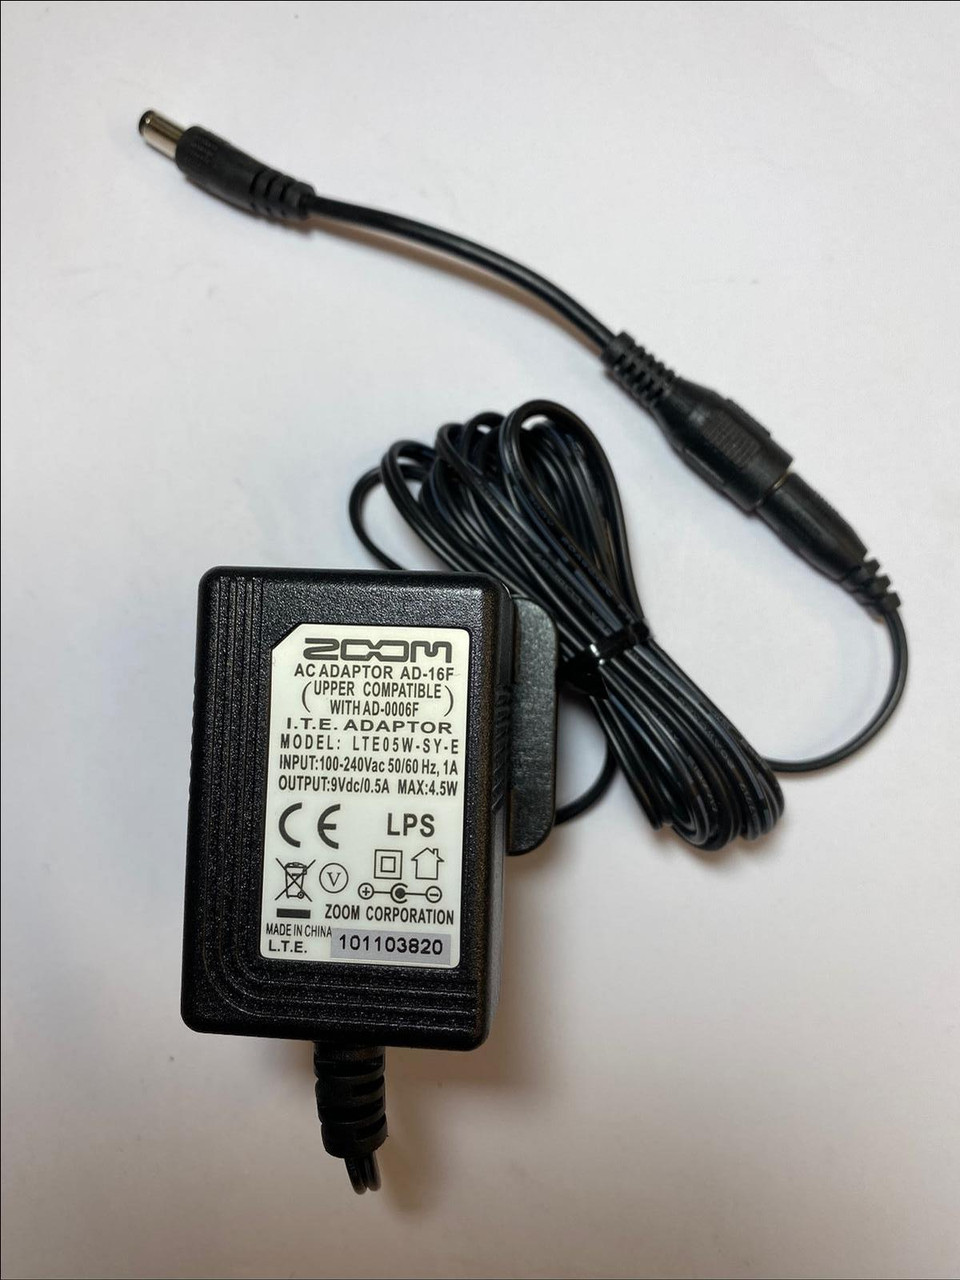 9V Negative Polarity Switching Adapter for Roland MT-90S Music